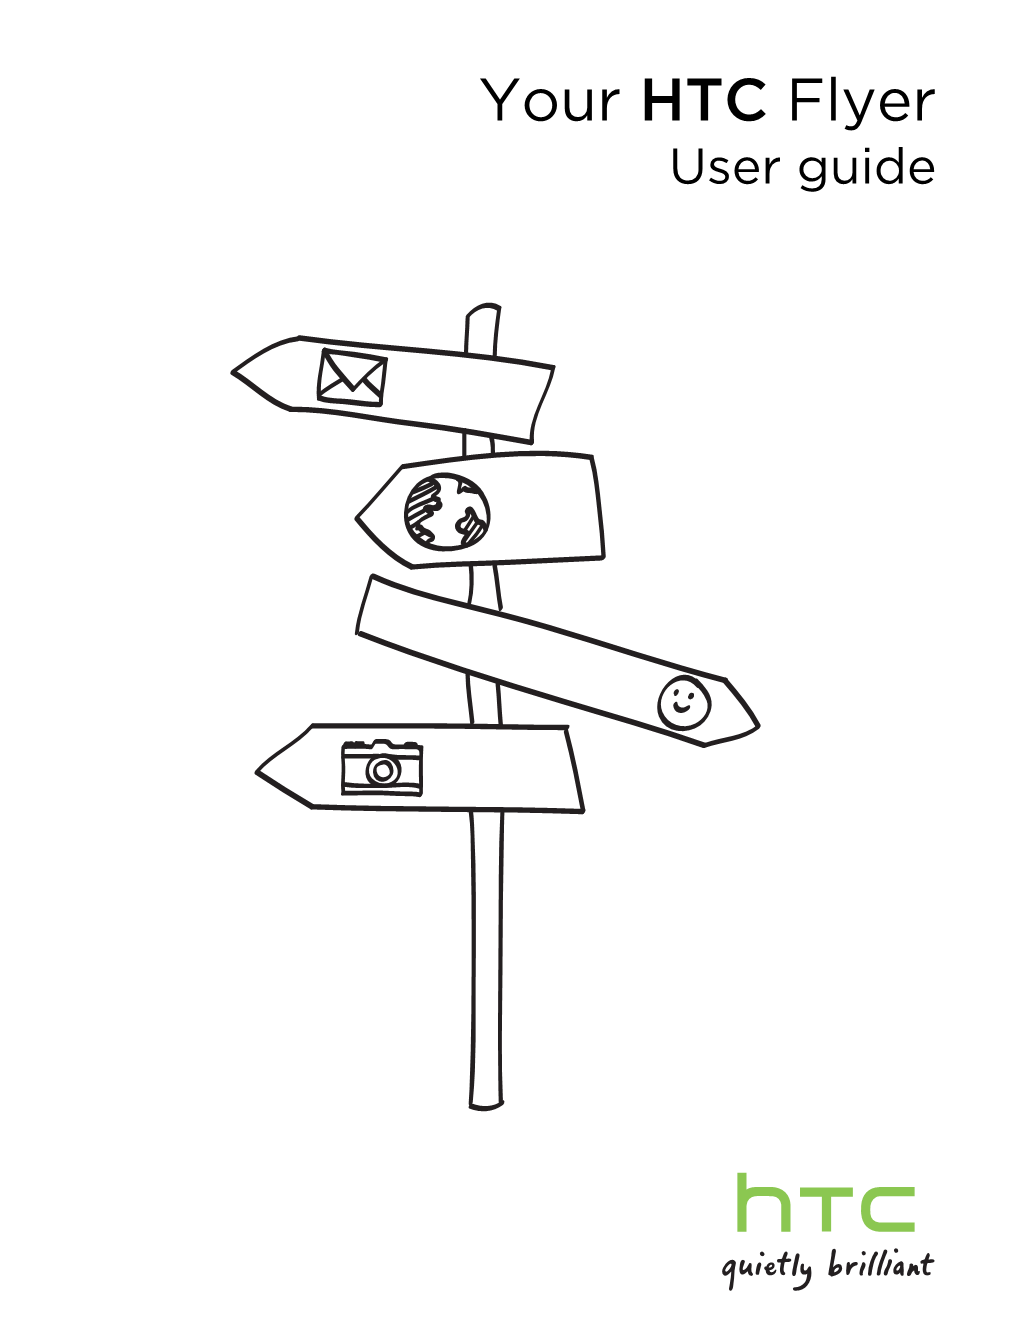 Your HTC Flyer User Guide 2 Contents Contents